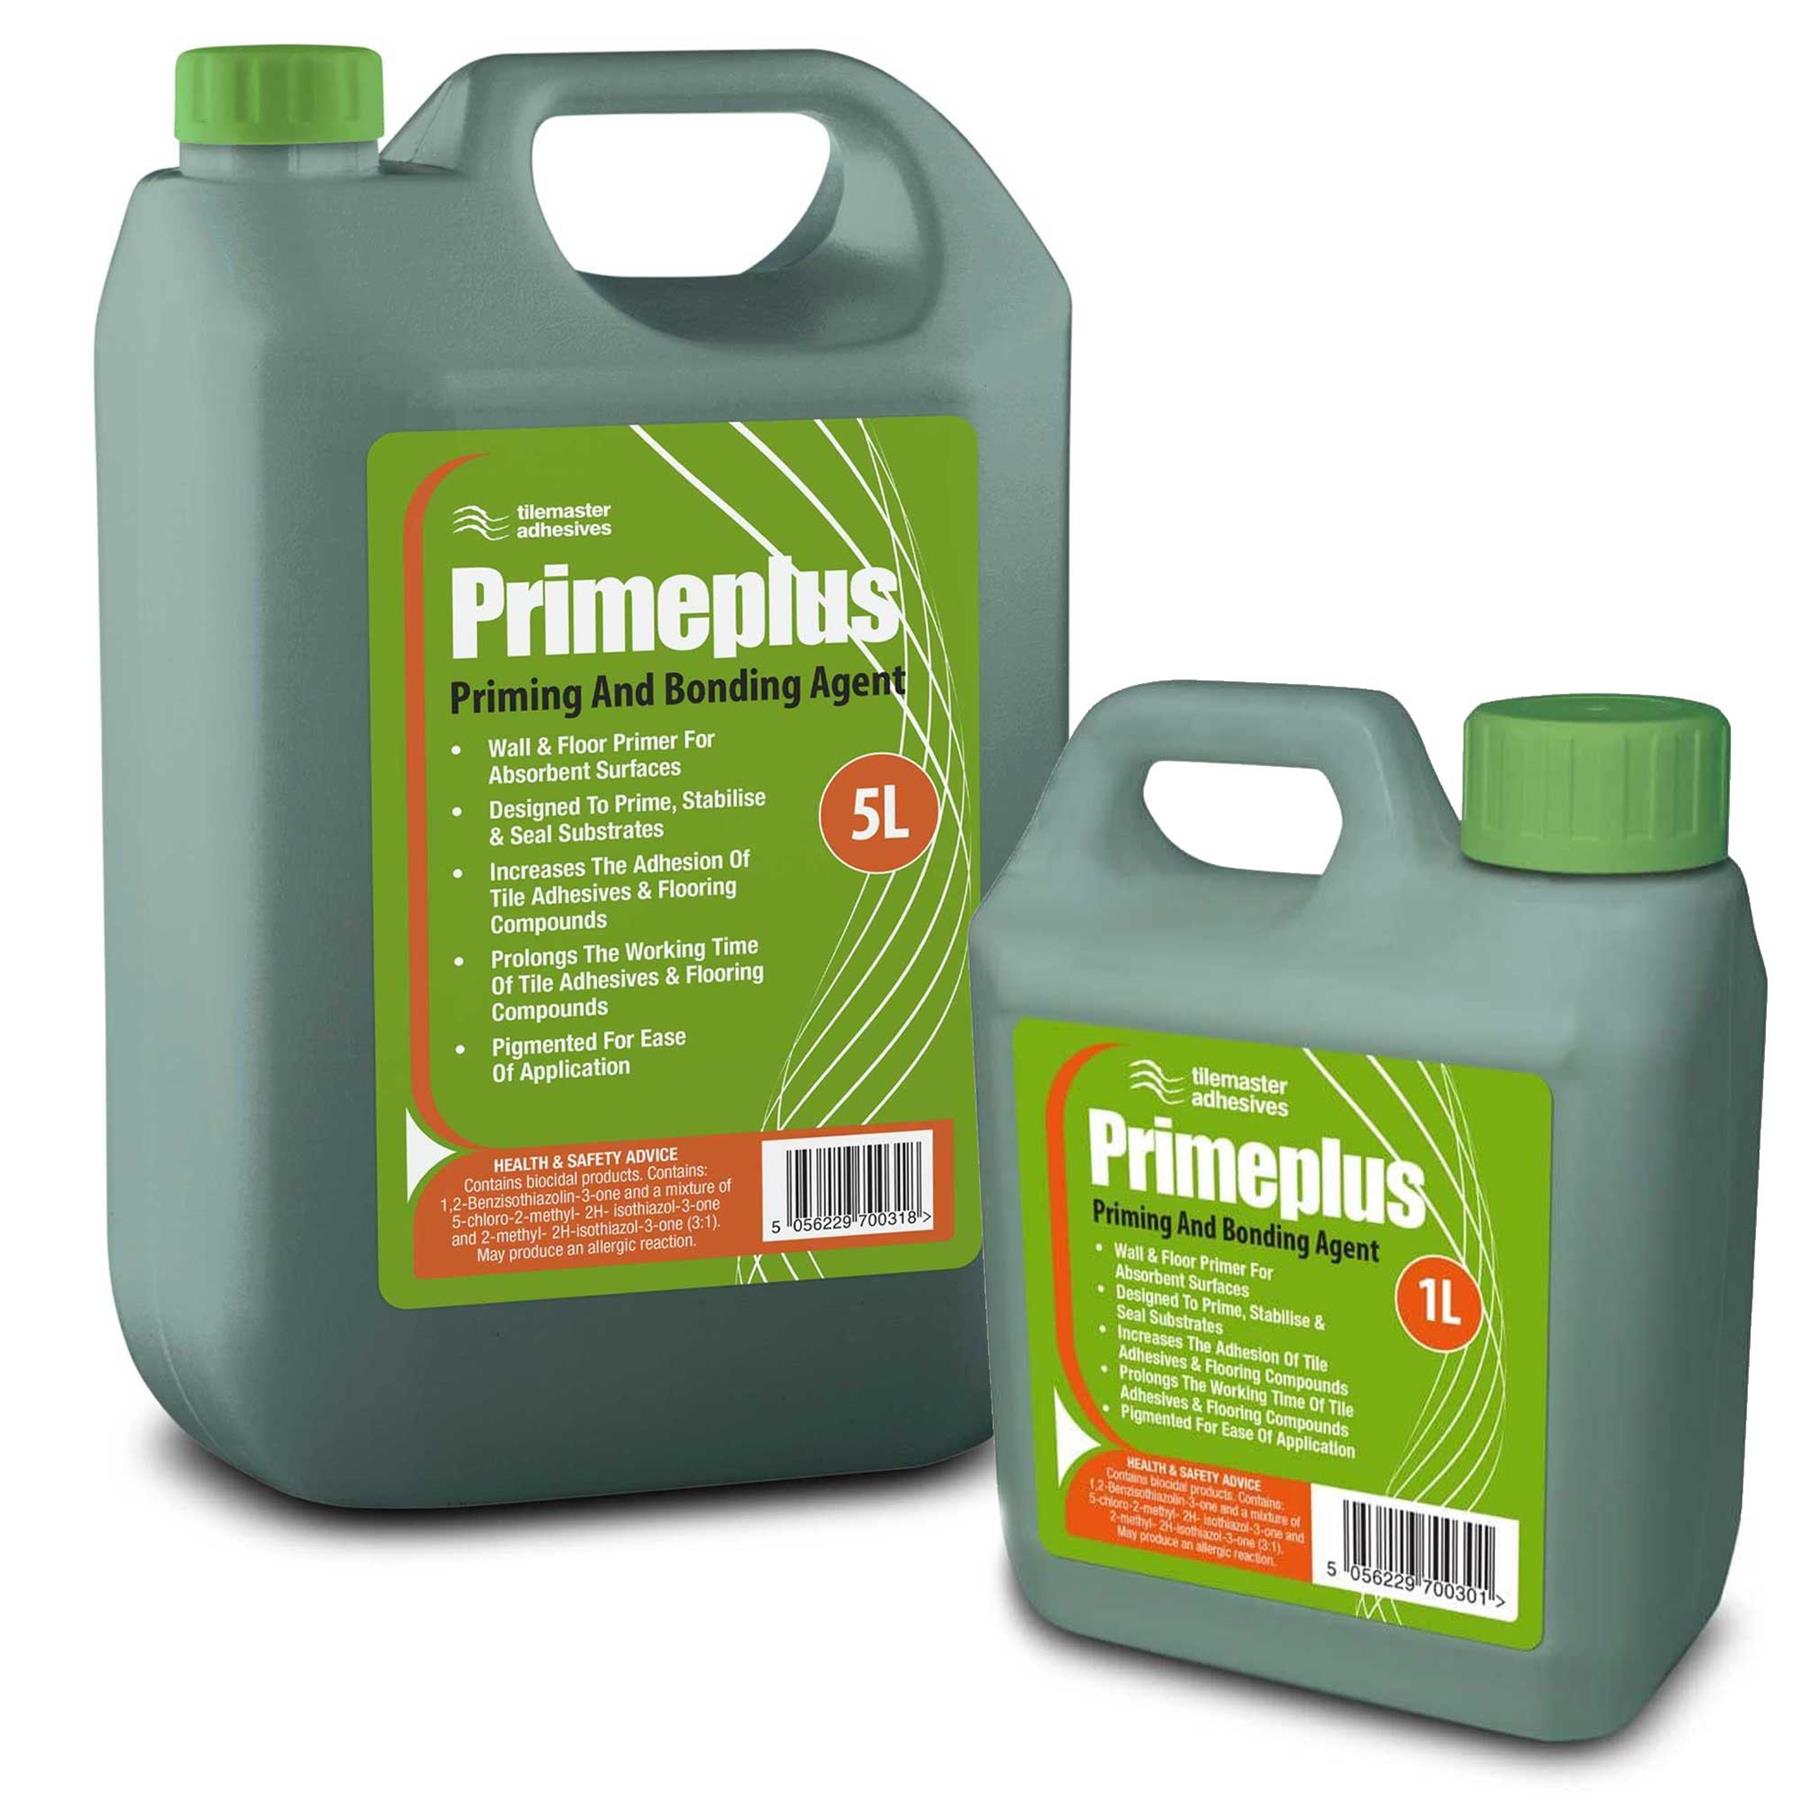 Tilemaster Prime Plus Priming and Bonding Agent in both sizes